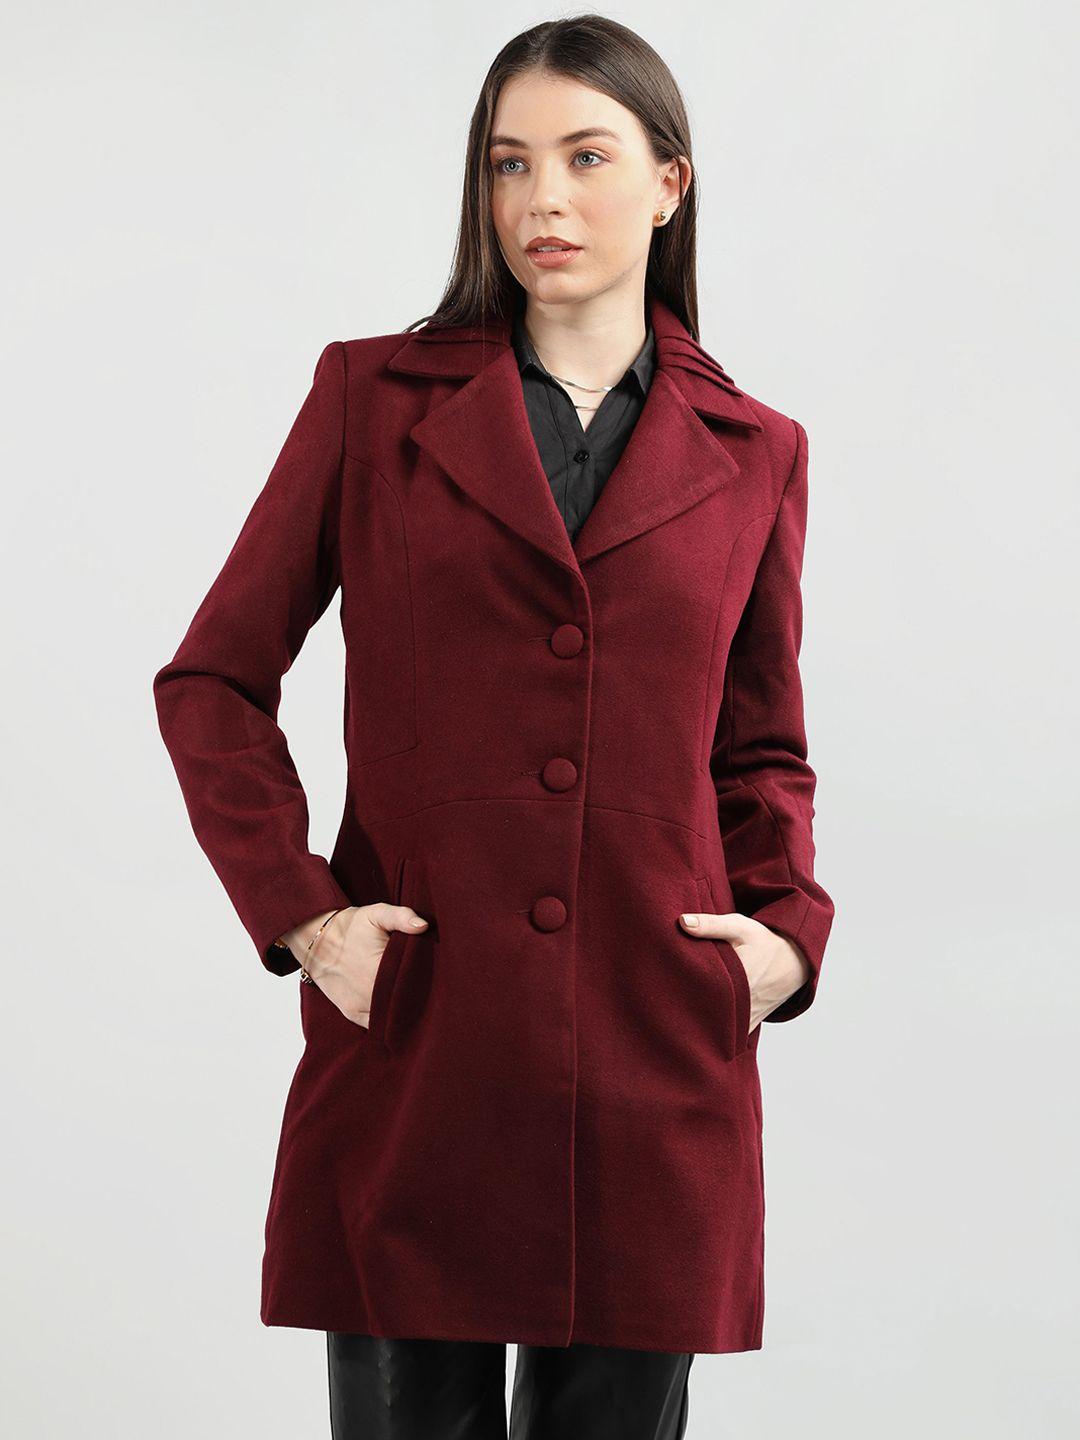 lebork notched lapel woollen single-breasted overcoat